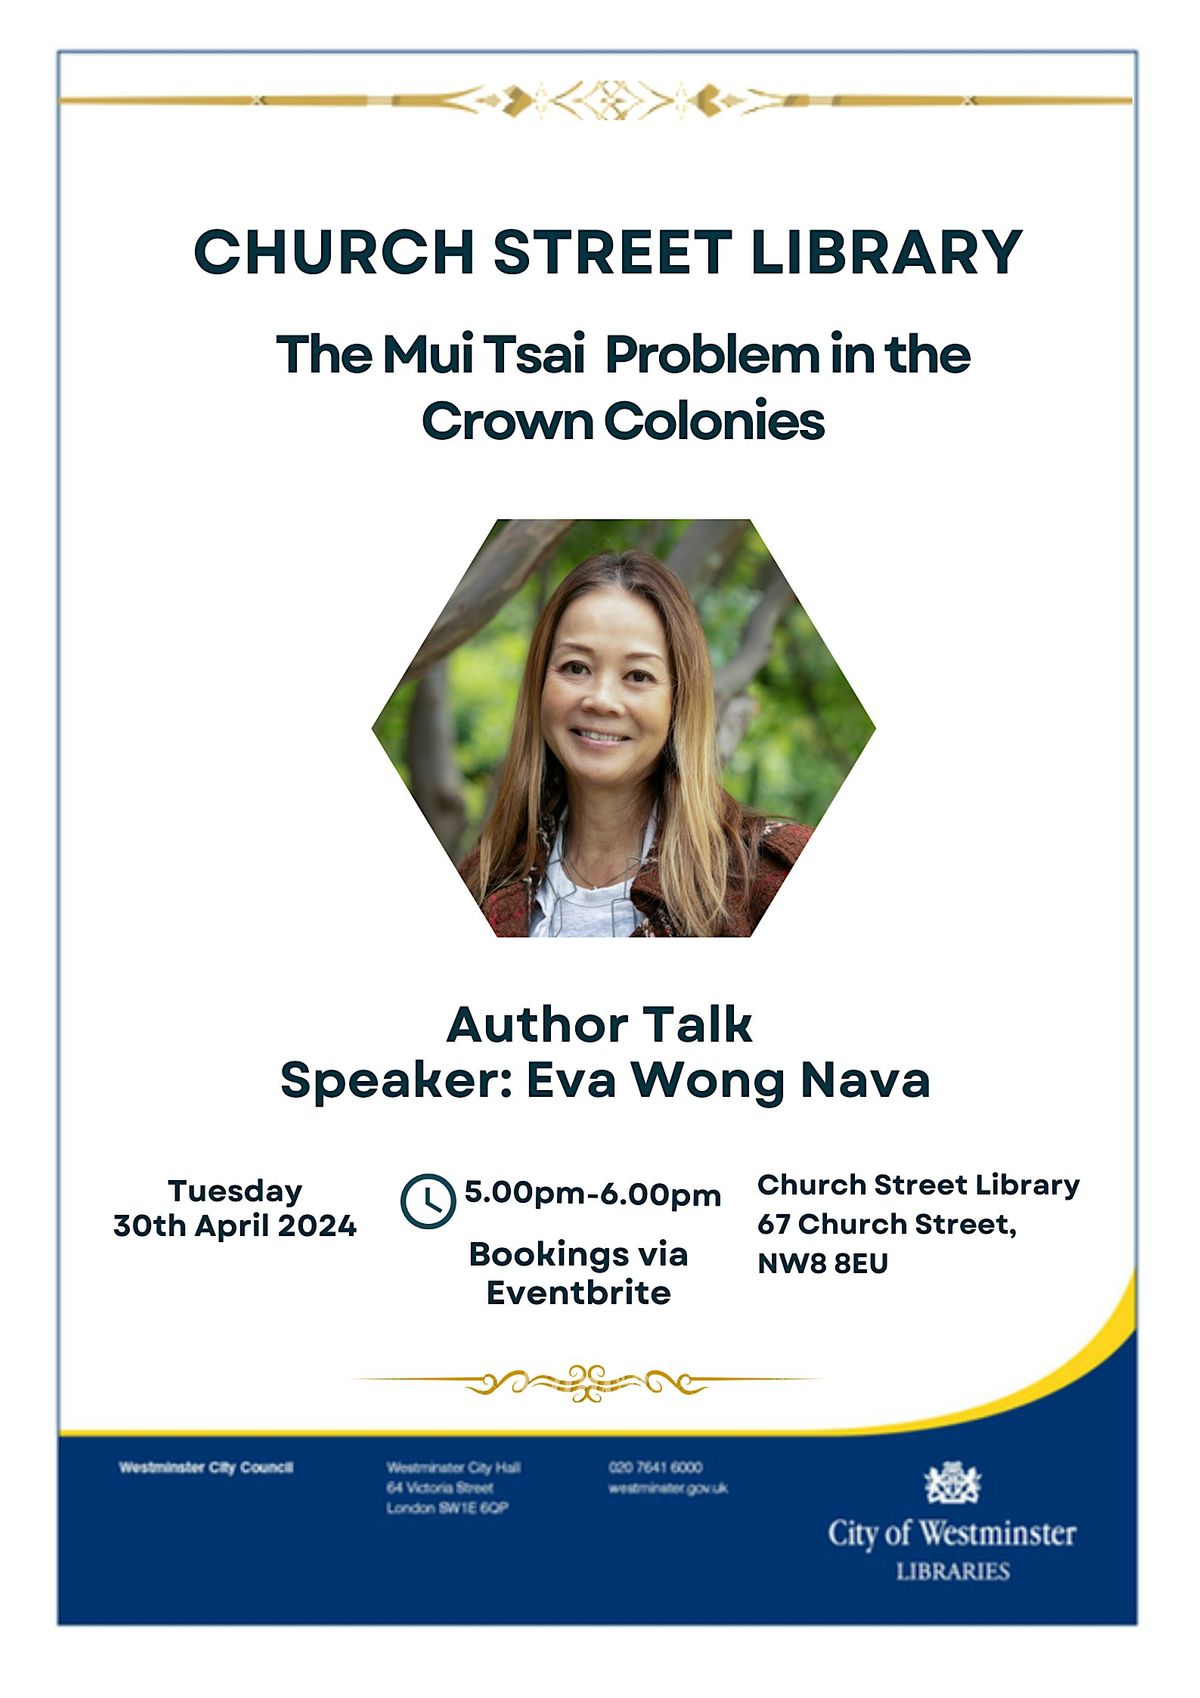 Author Talk: The Mui Tsai Problem of the Crown Colonies